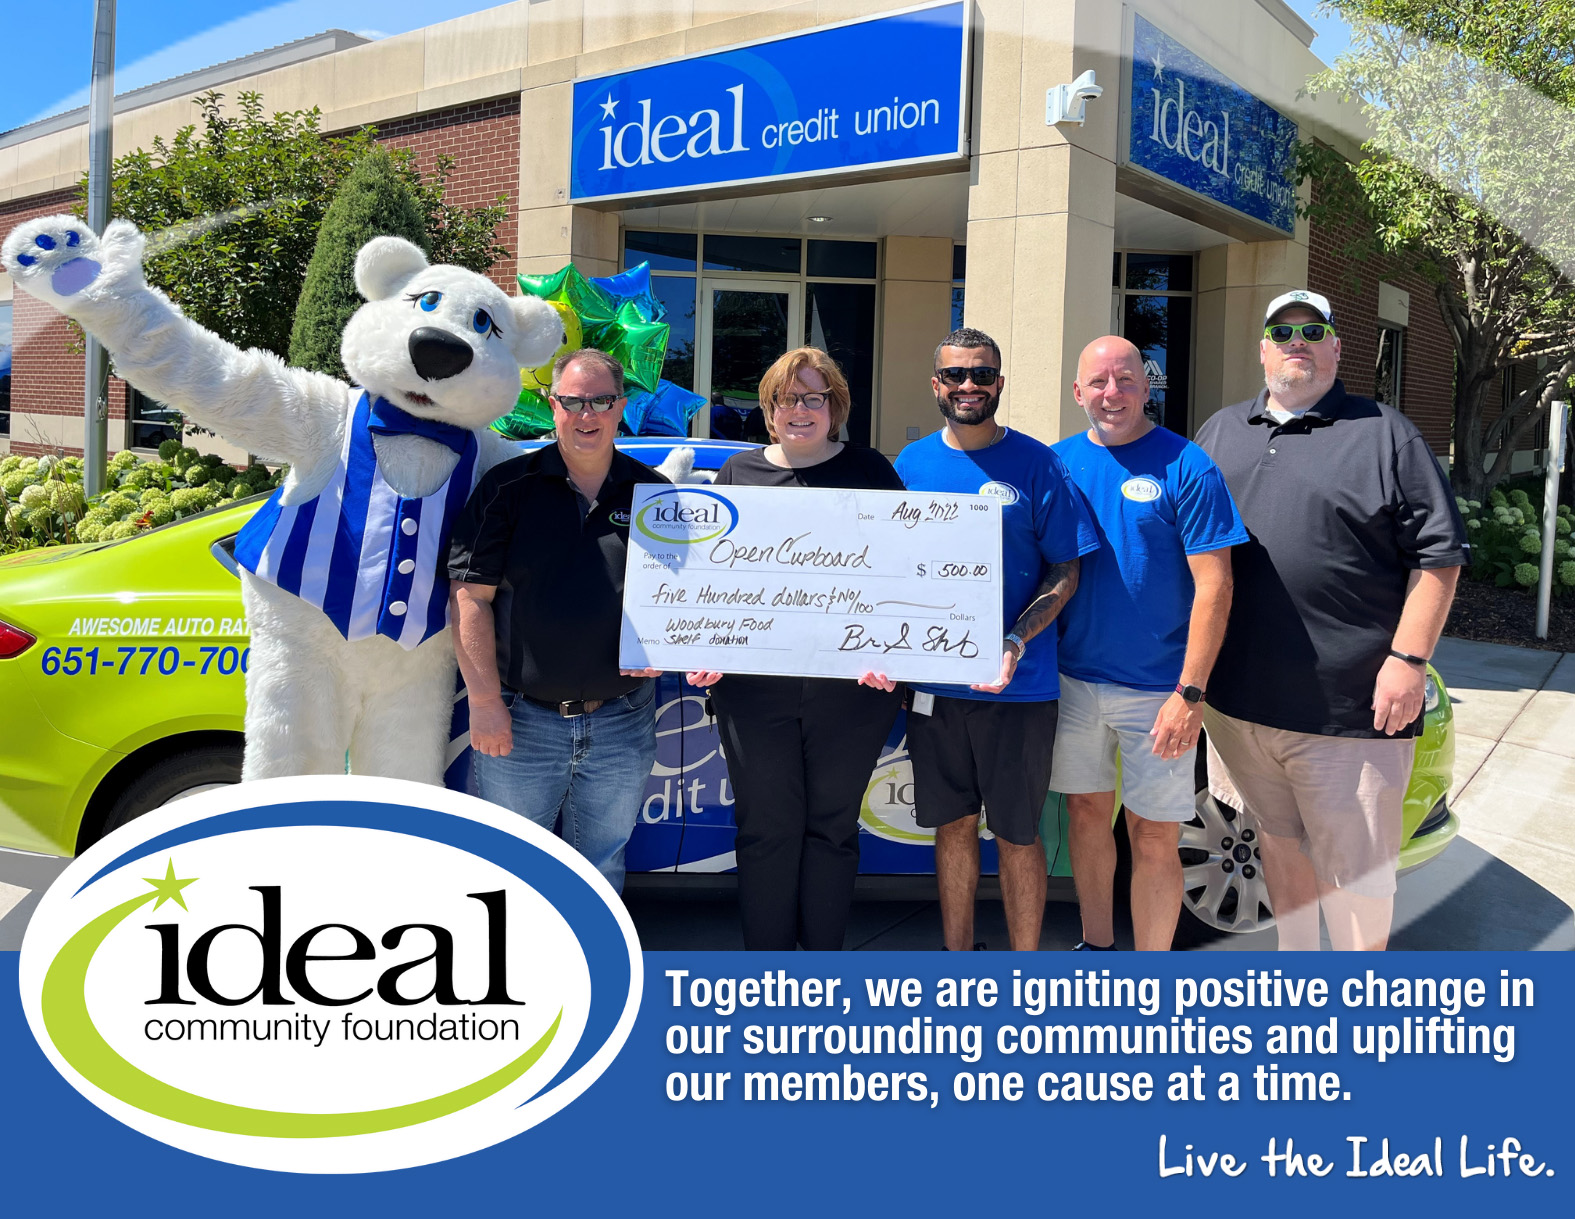 Ideal Credit Union Celebrates Members and Community with Special Events, Charitable Donations and Prizes in August